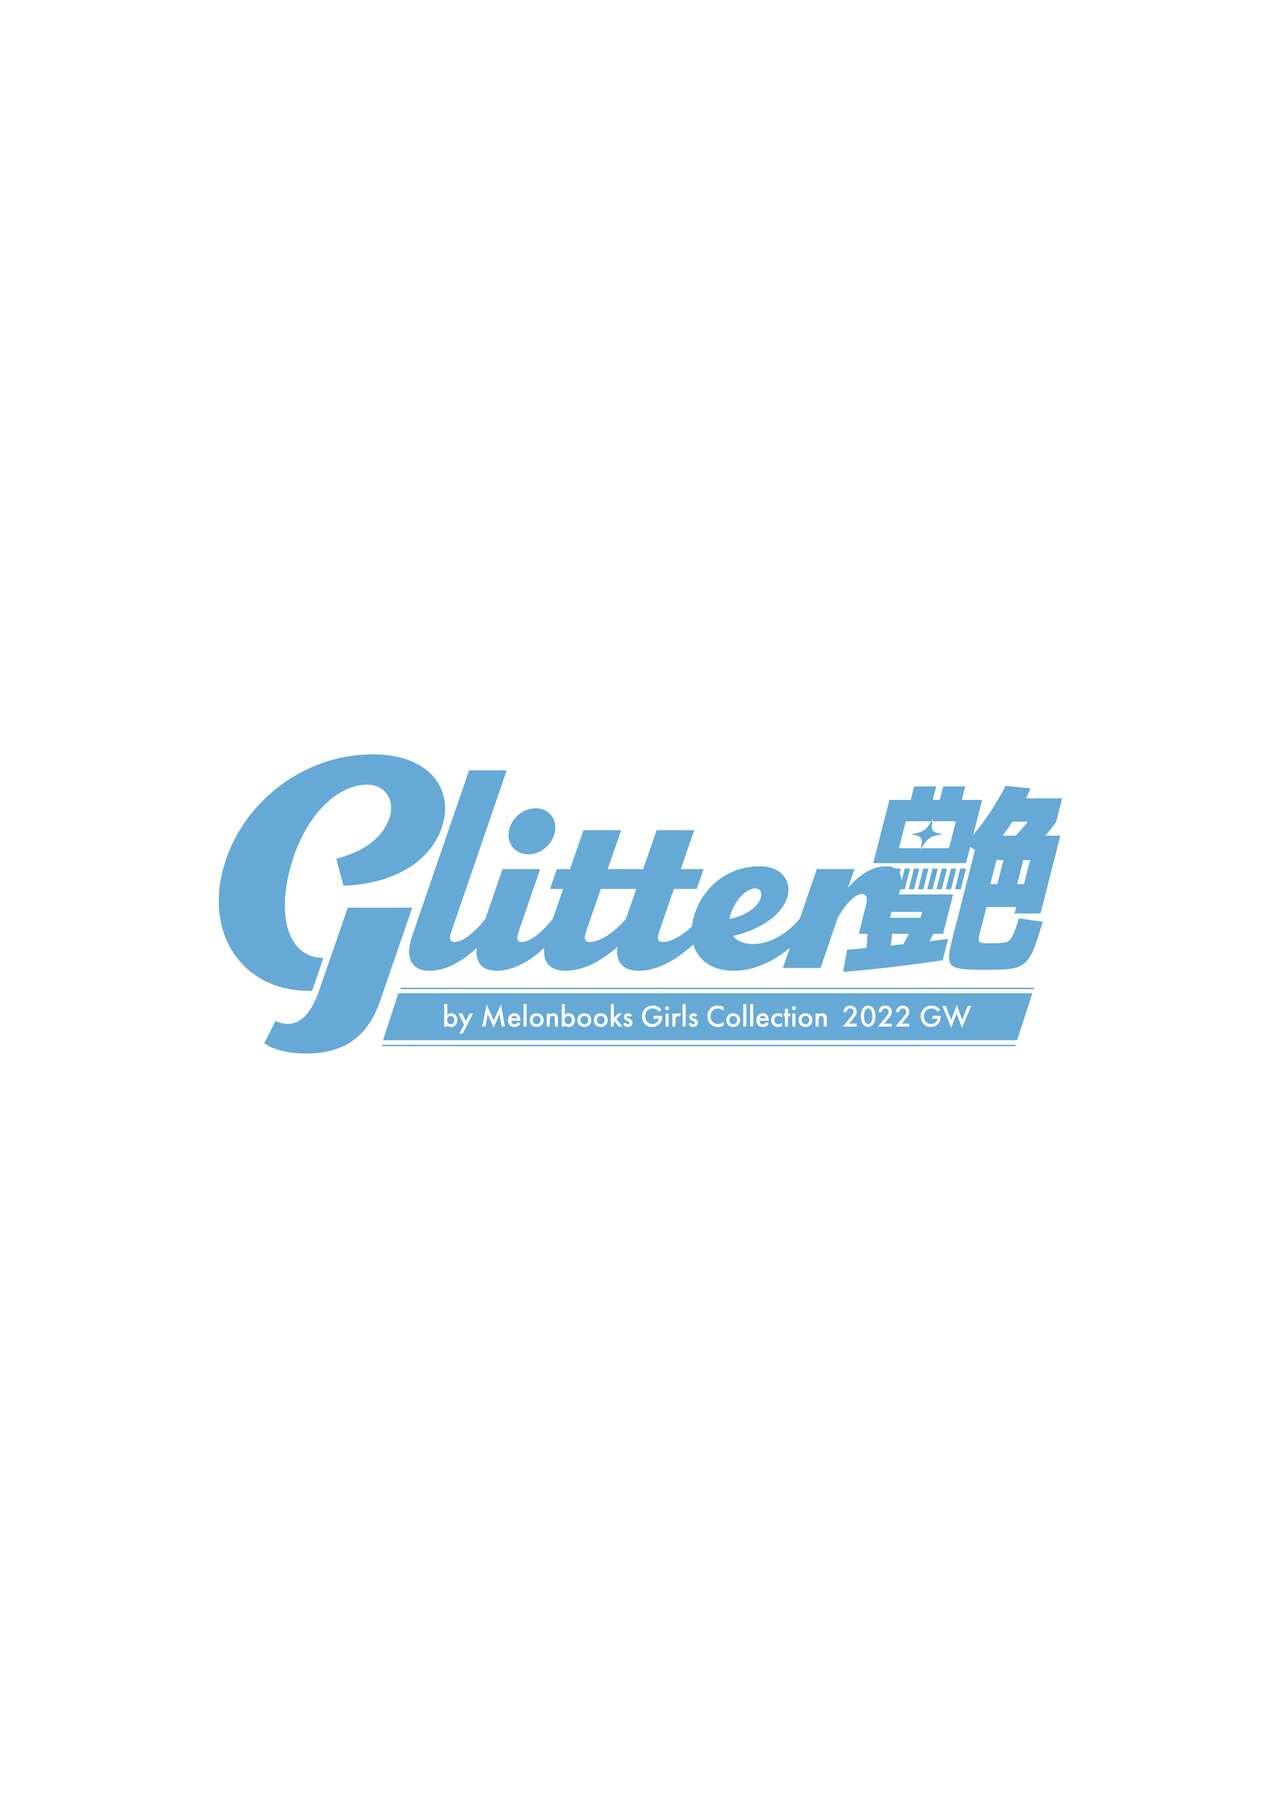 GLITTER 艶 by Melonbooks Girls Collection 2022GW 1